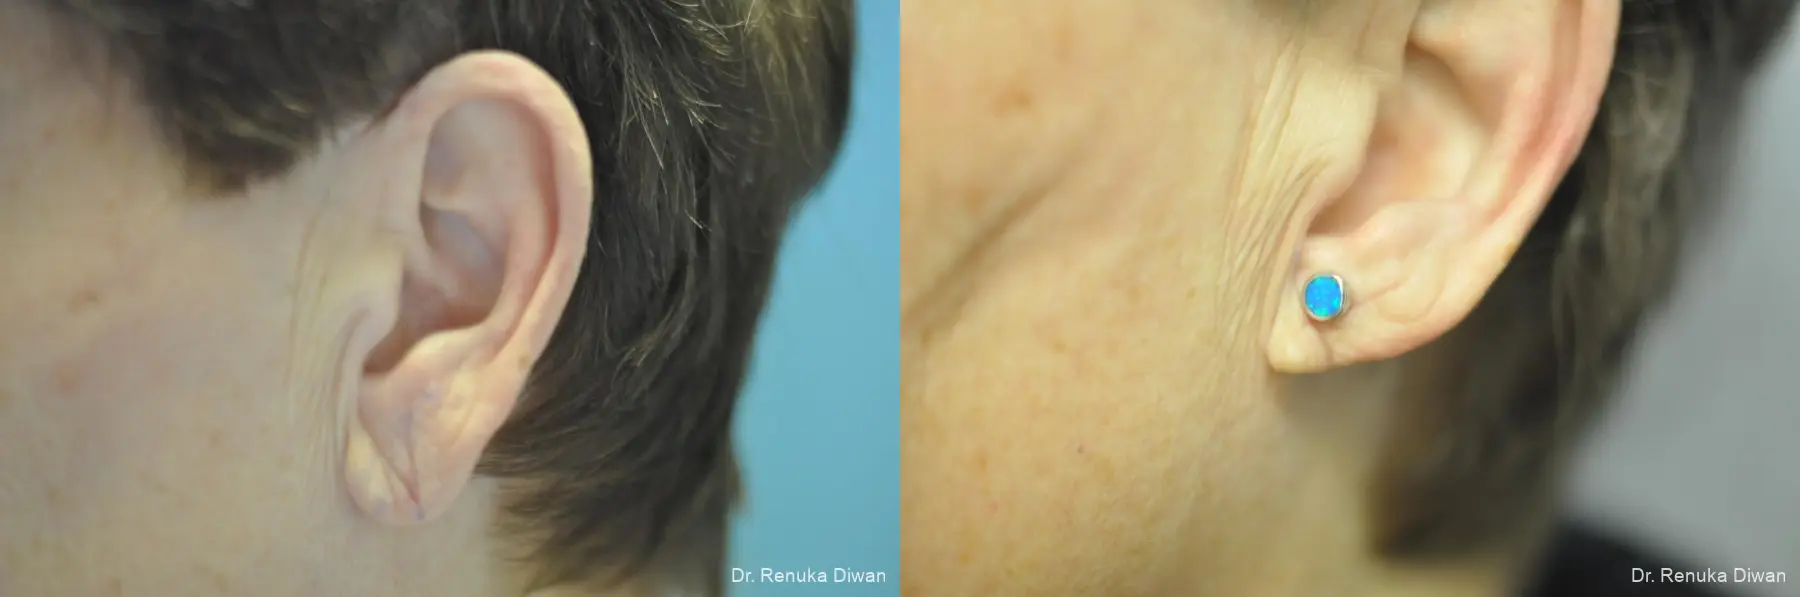 Earlobe Surgery: Patient 10 - Before and After 1